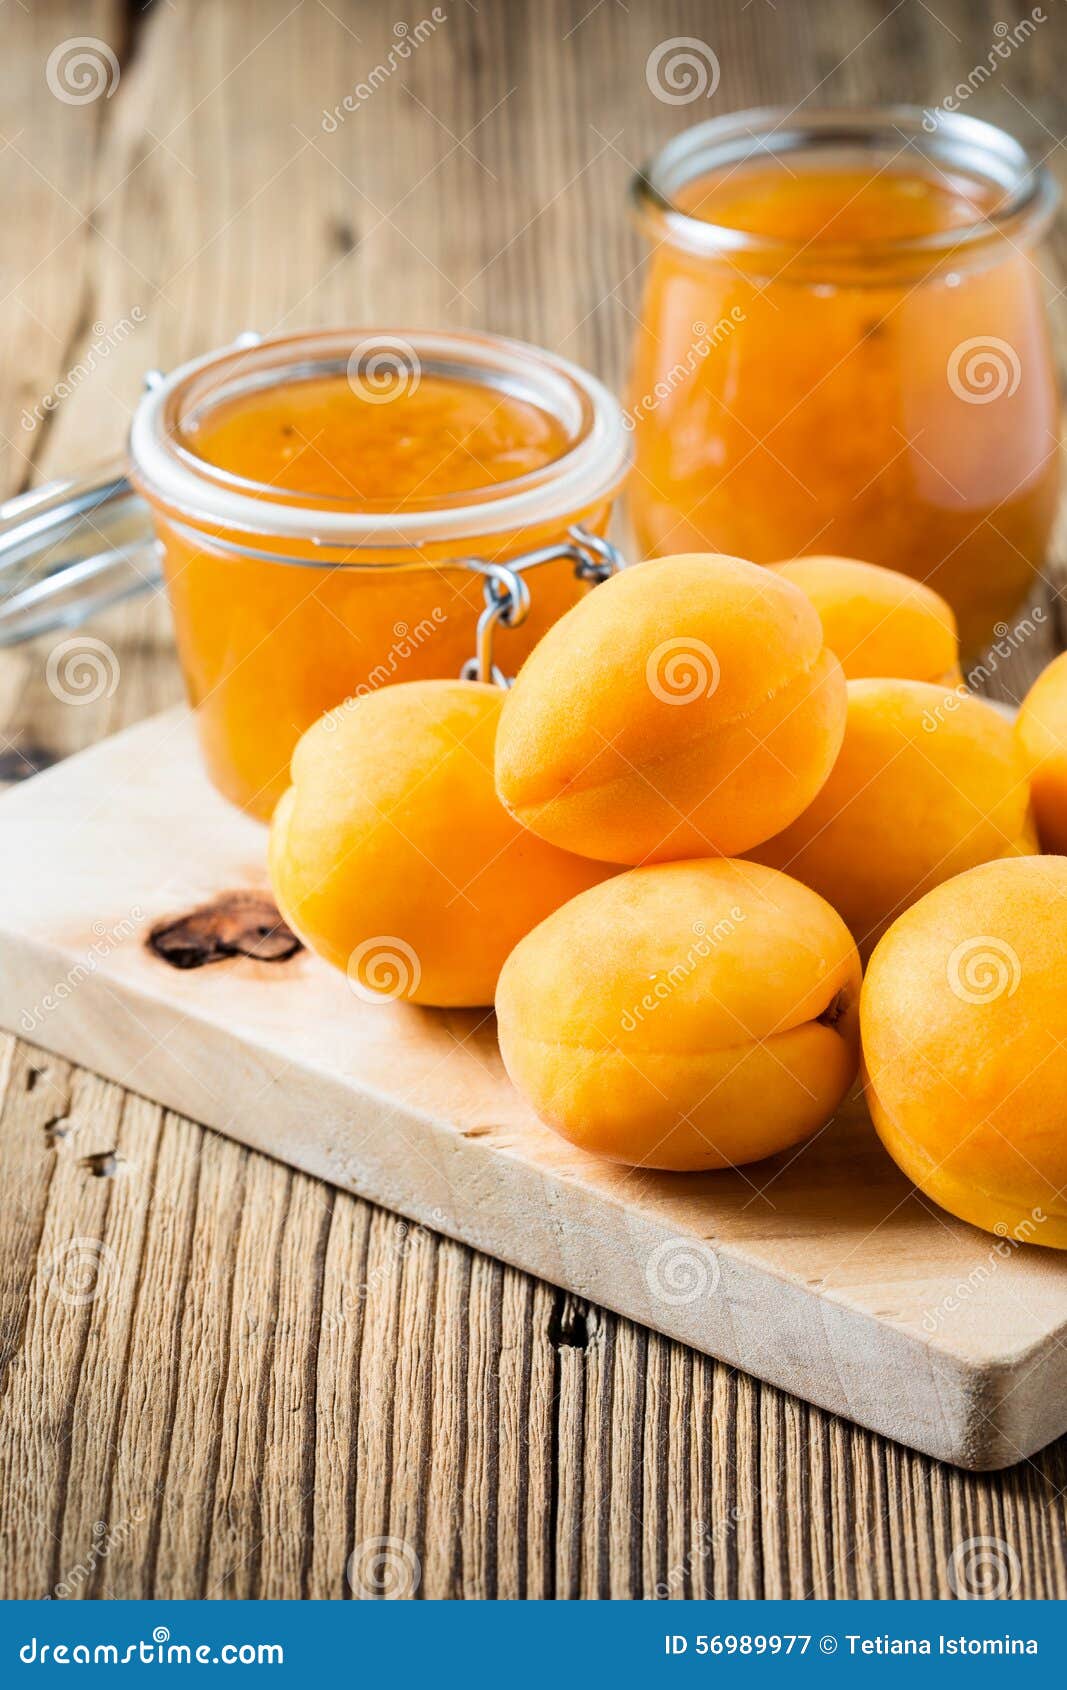 Fresh Apricots And Homemade Apricot Chutney In A Glass Jar Stock Image ...